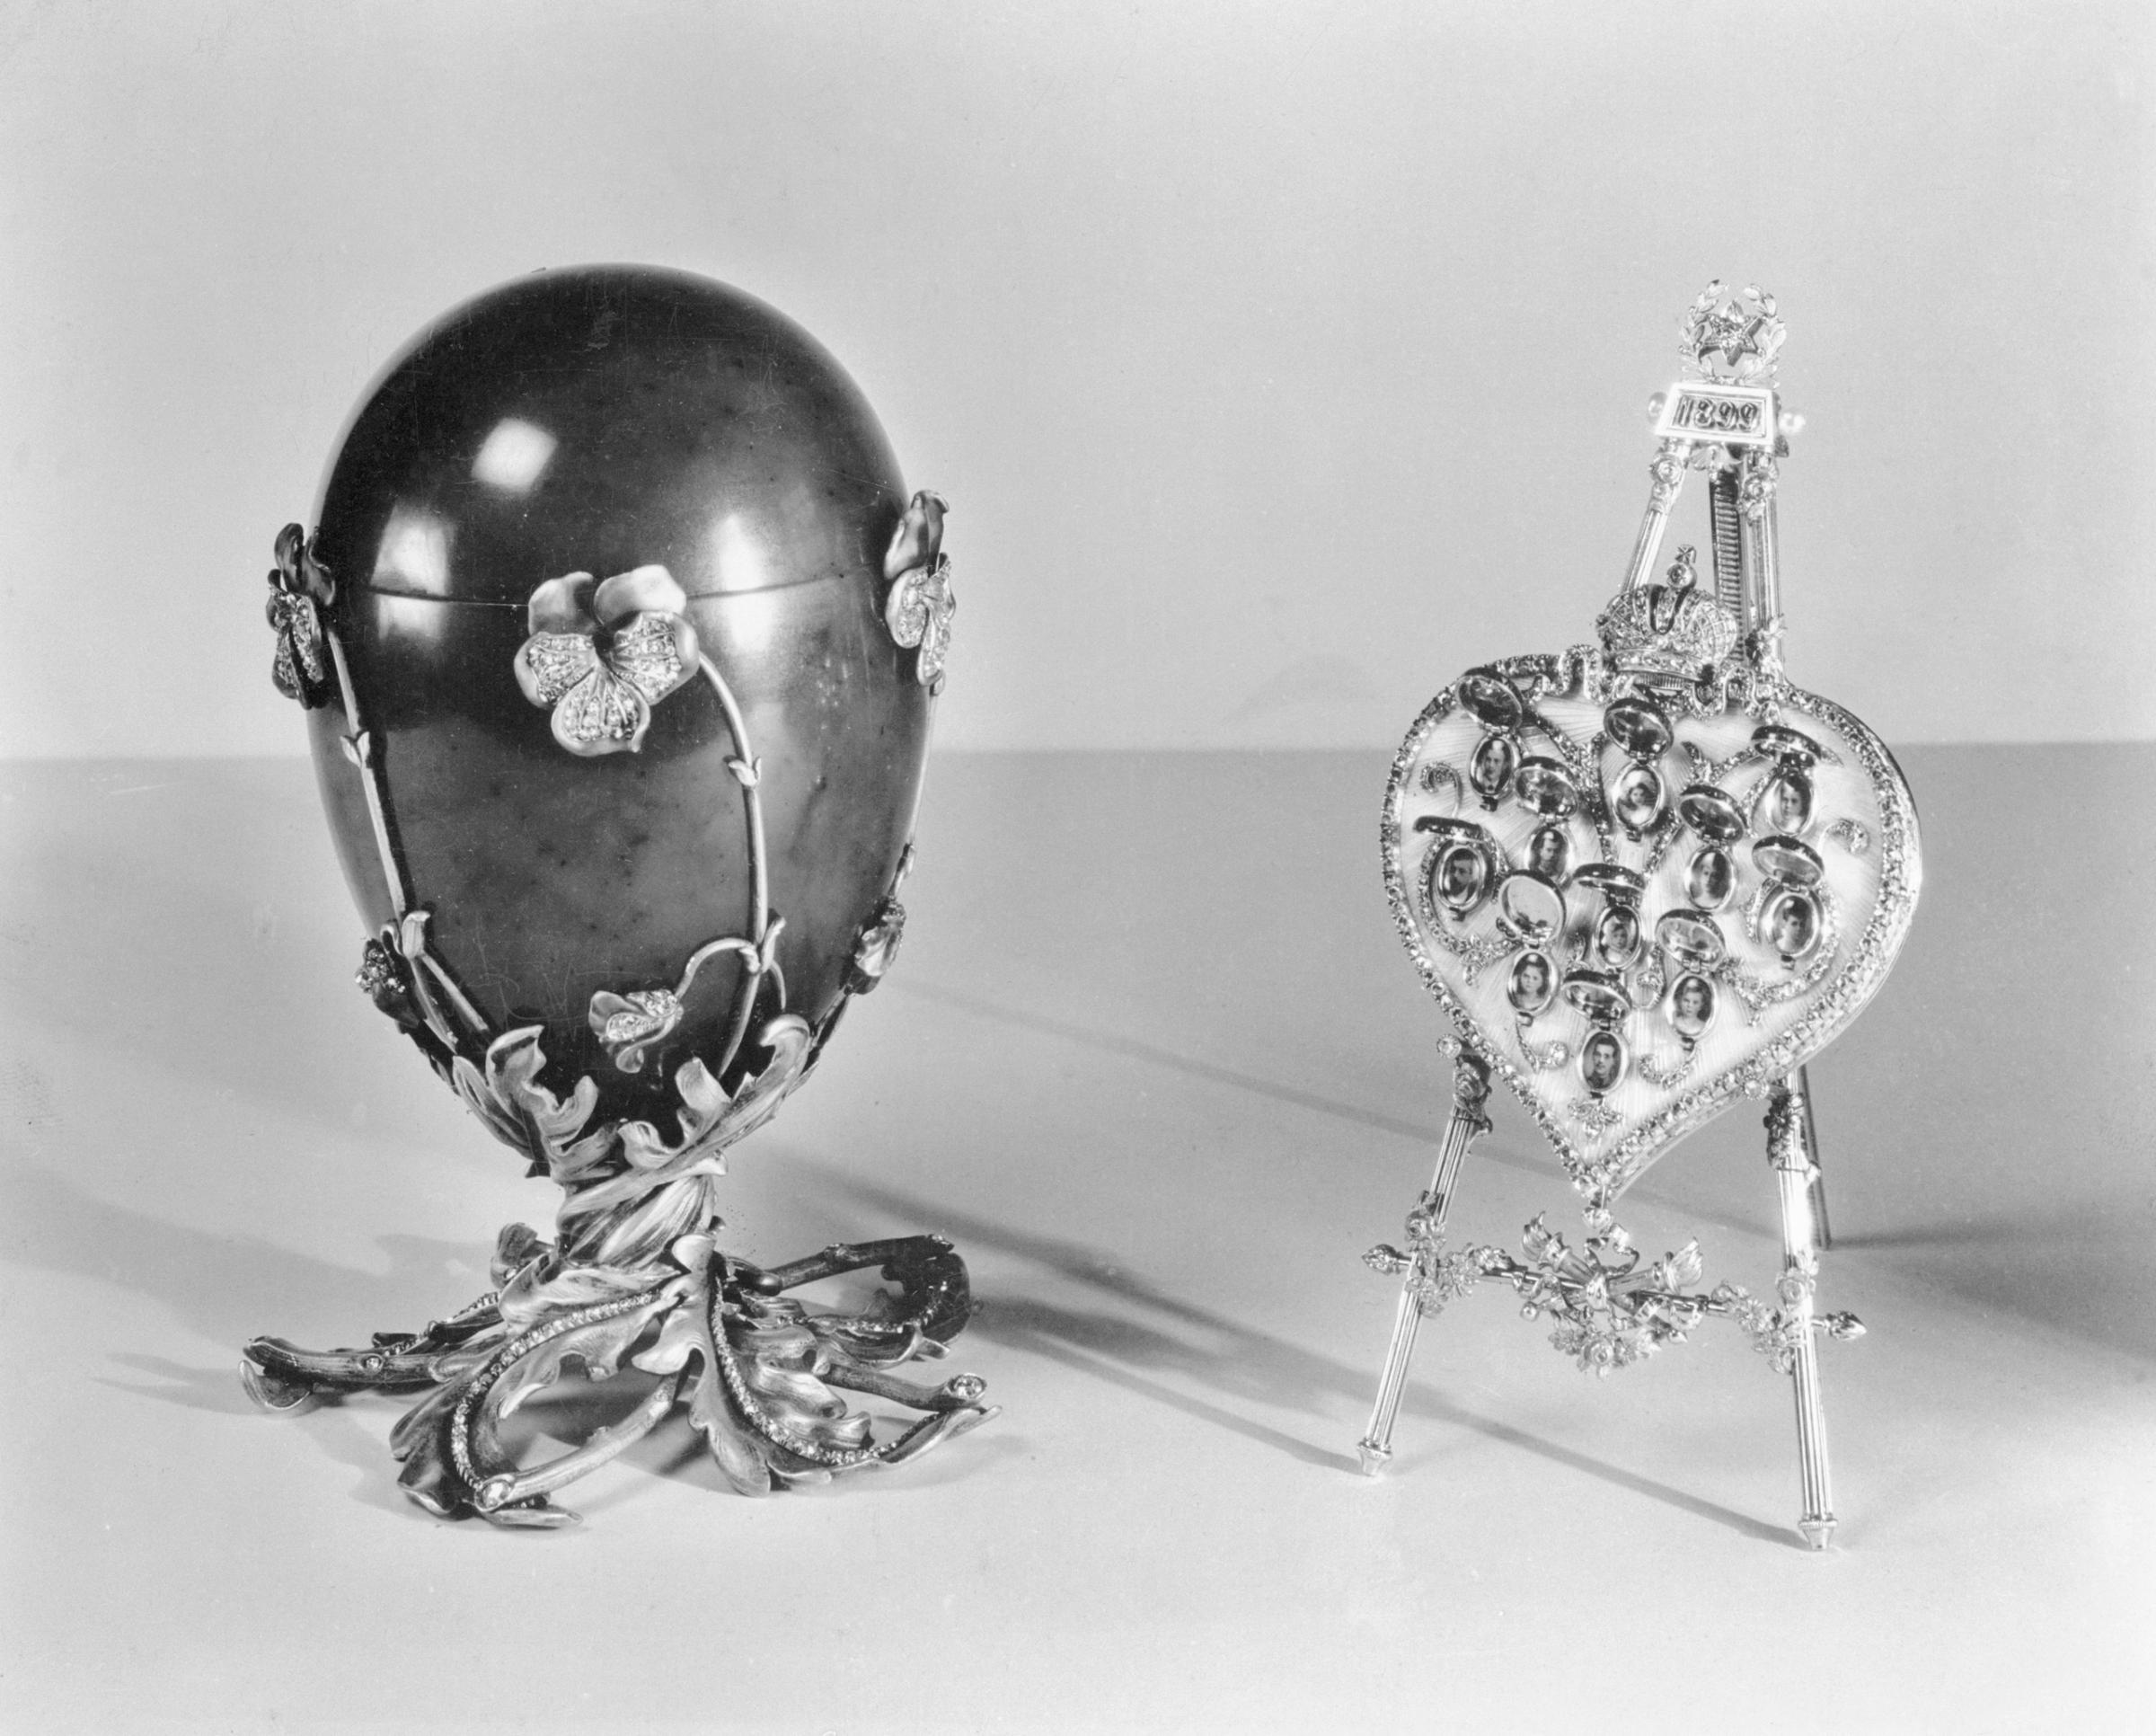 Russian Imperial Gems Shown In New York. Spinach jade Easter egg, decorated with pansies of enamel and diamonds, mounted on a pedestal of twisted gold leaves and twigs, also studded with diamonds. It contains a folding easel in the shape of a diamond-studded heart, covered with translucent enamel. The heart is surmounted by the Imperial Crown in diamonds. It was presented by Czar Nicholas II to his mother, the Dowager Empress Marie, at Easter in 1899. The work of Carl Faberge, late court jeweler, it is being exhibited with other Russian Imperial jewels and art treasures at the Hammer Galleries in New York City, 1937.